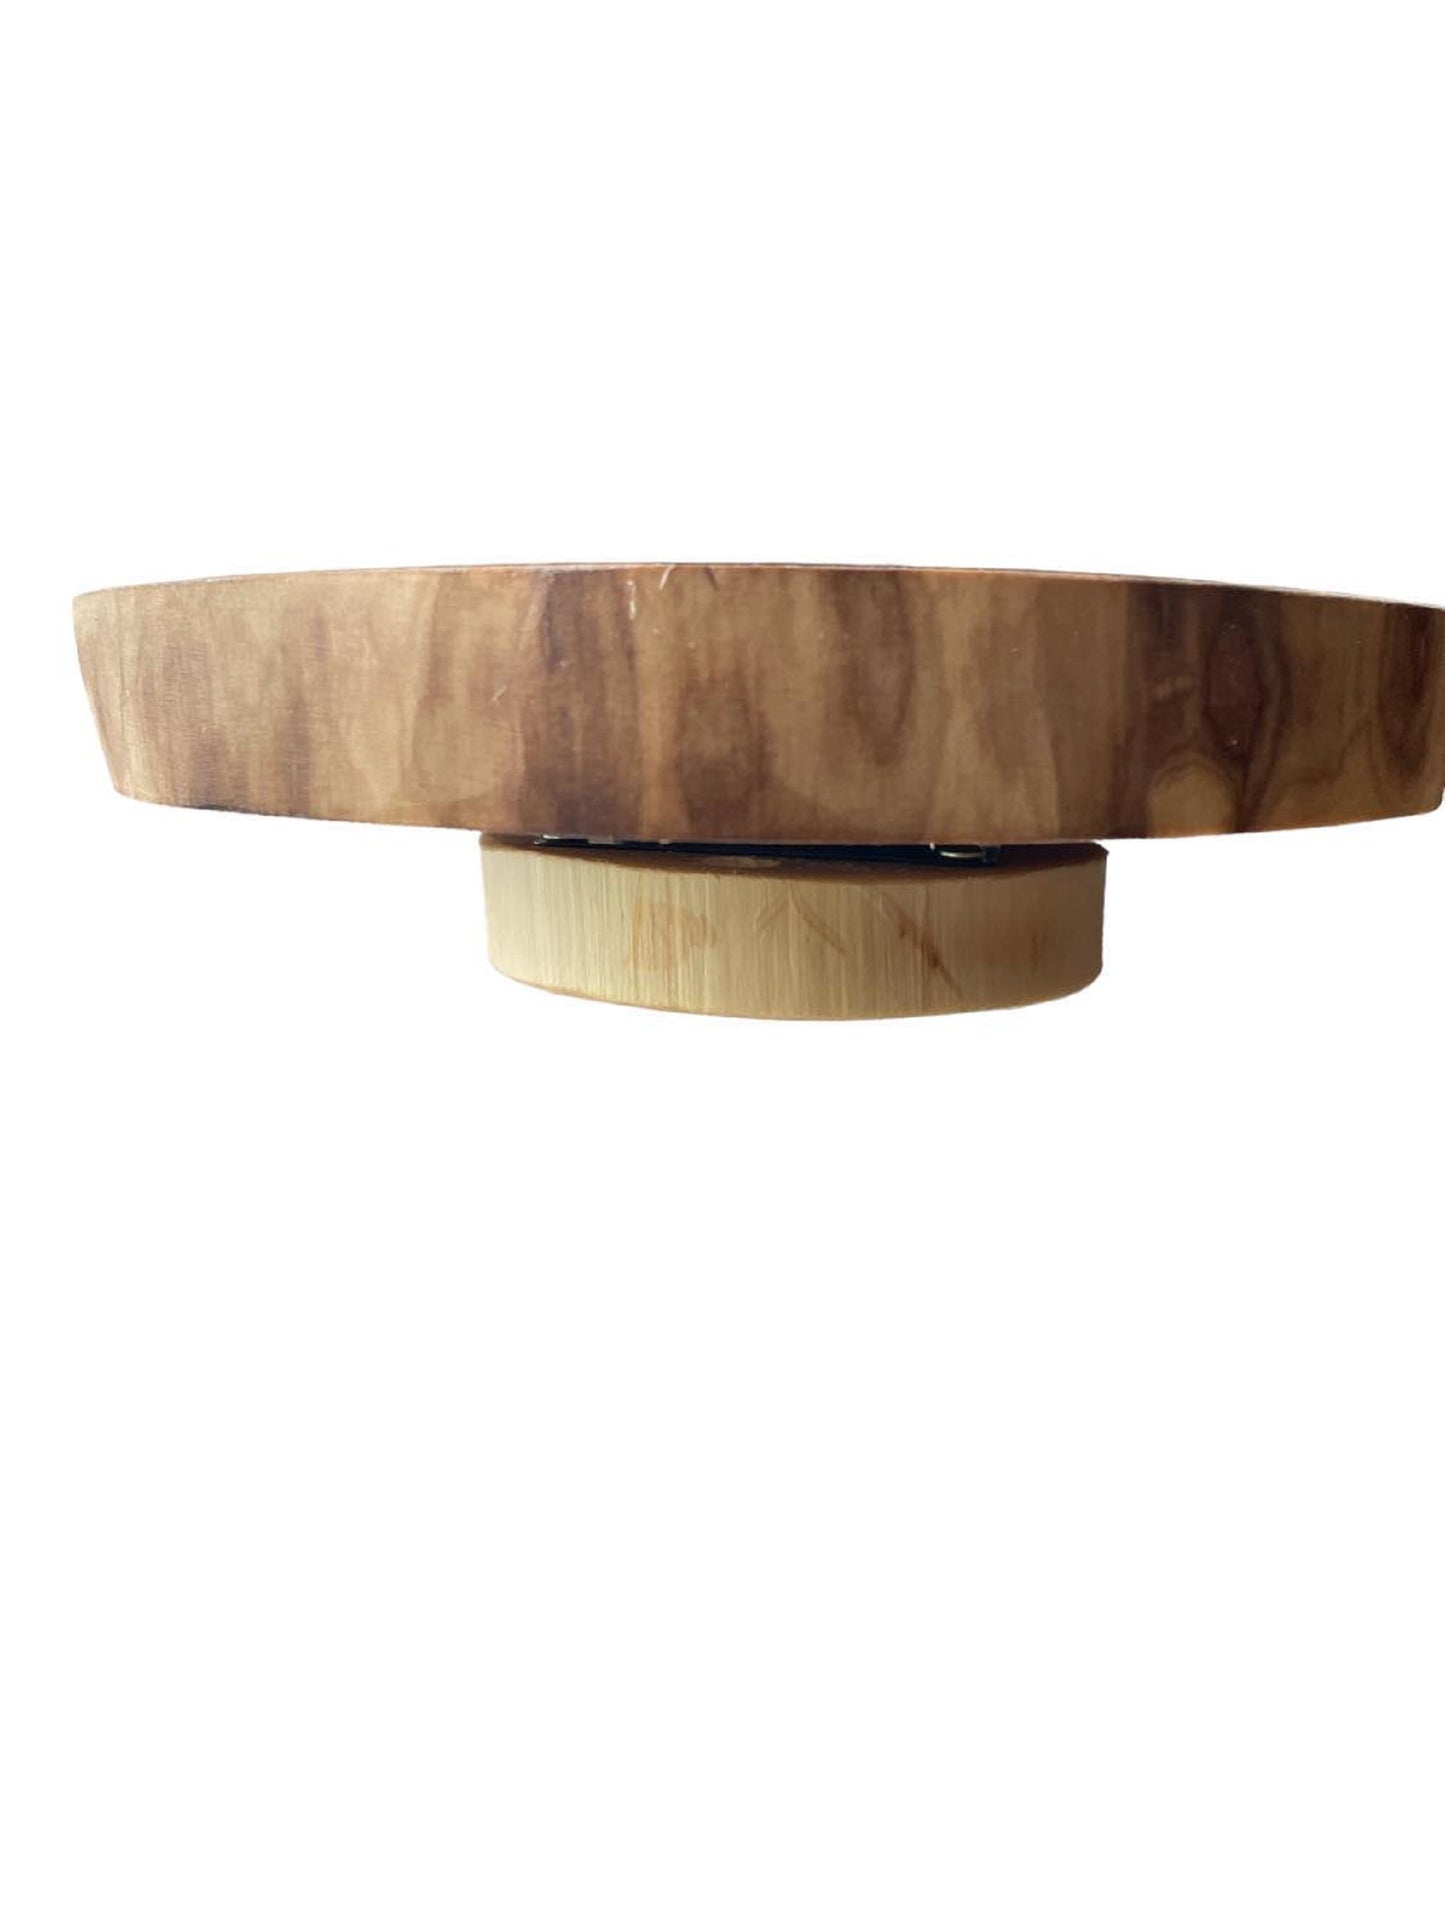 Rustic Lazy Susan Hand Crafted with Log Slices No Bark Turn Table